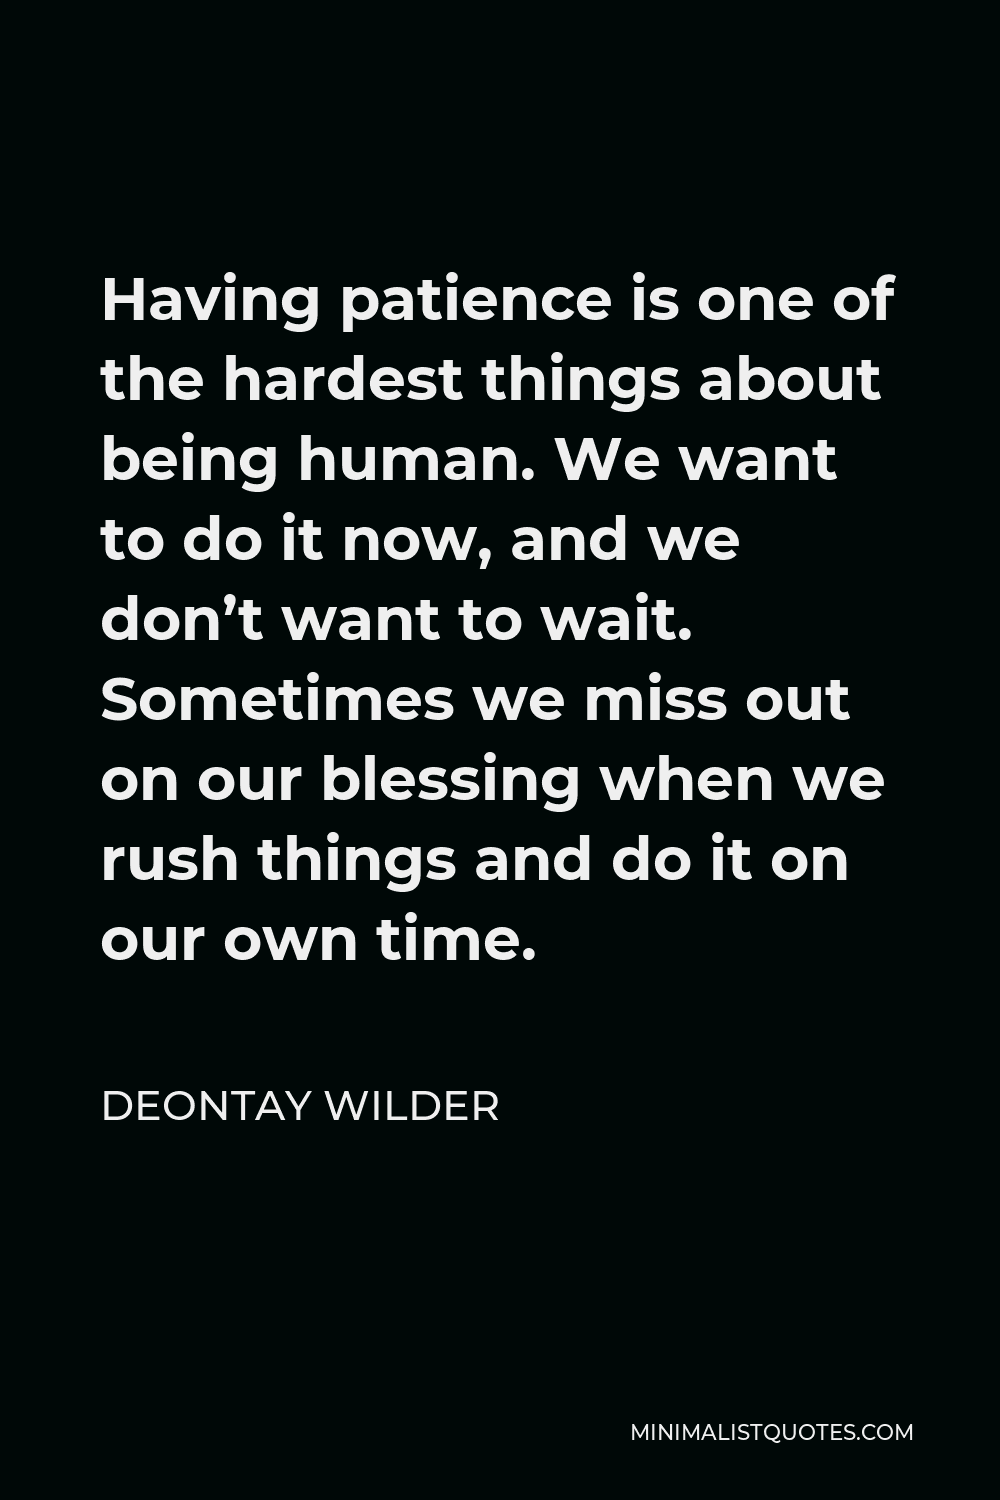 Deontay Wilder Quote - Having patience is one of the hardest things about being human. We want to do it now, and we don’t want to wait. Sometimes we miss out on our blessing when we rush things and do it on our own time.